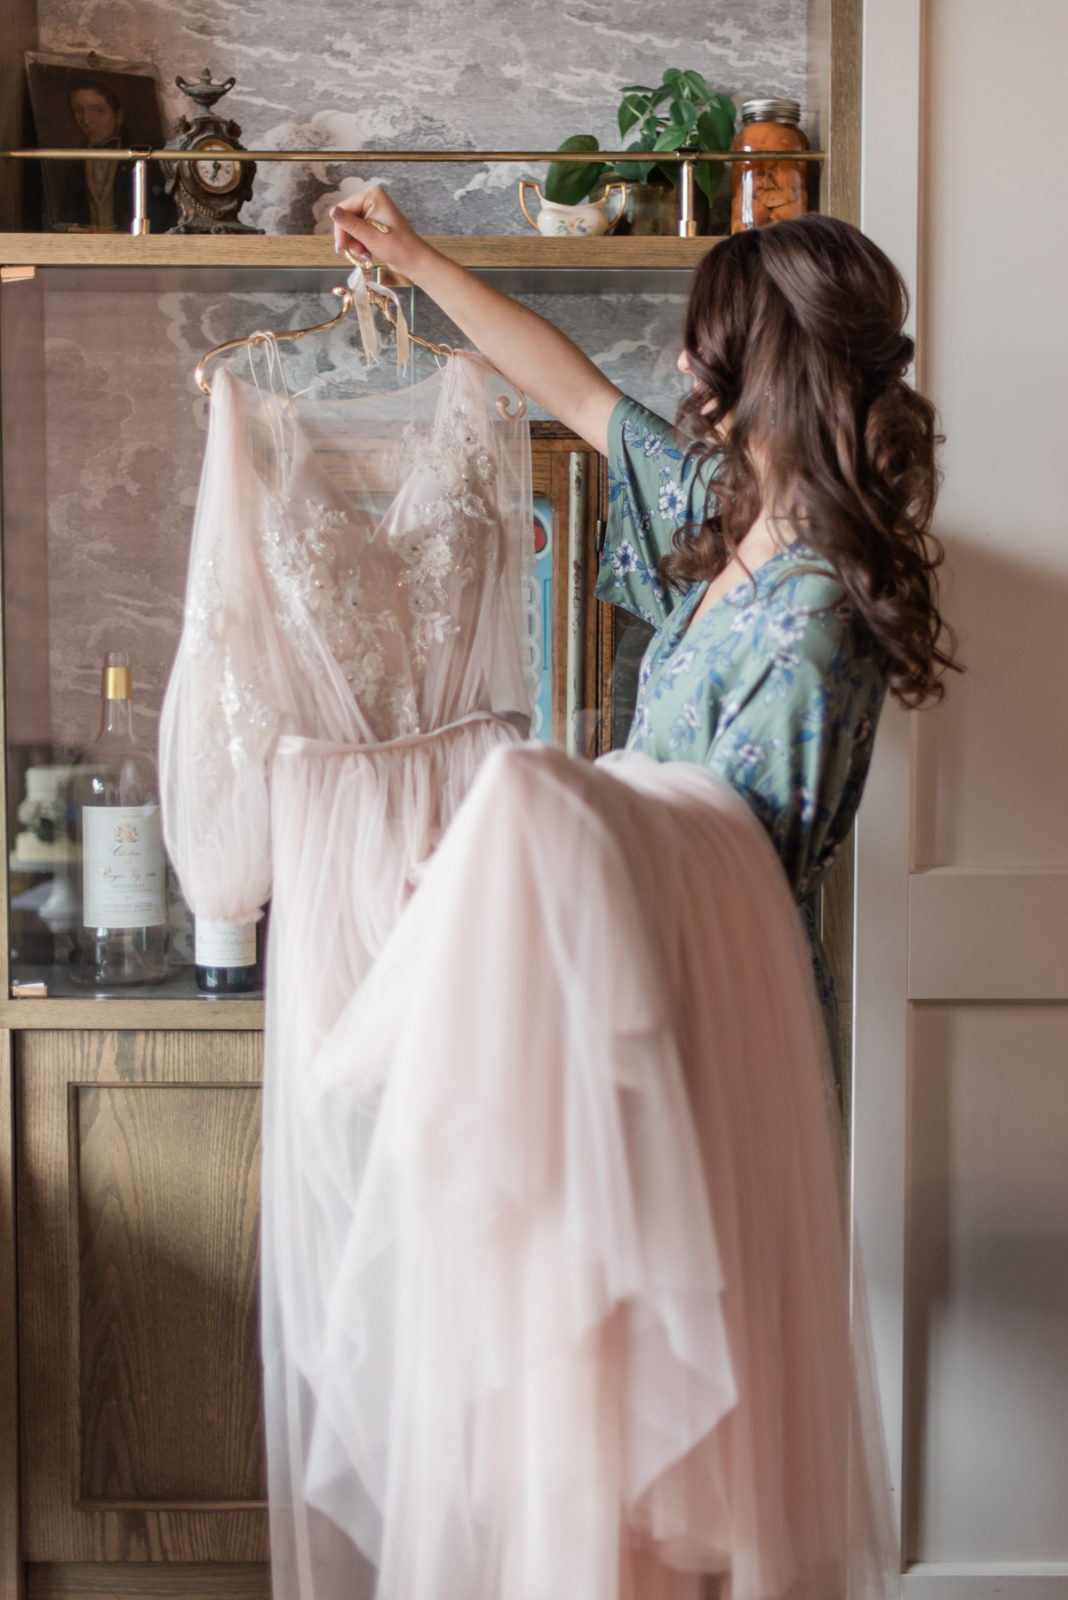 Romantically Regal Bridal Inspiration at the Royale YYC - wedding inspiration featured on Brontë Bride, wedding dress, getting ready